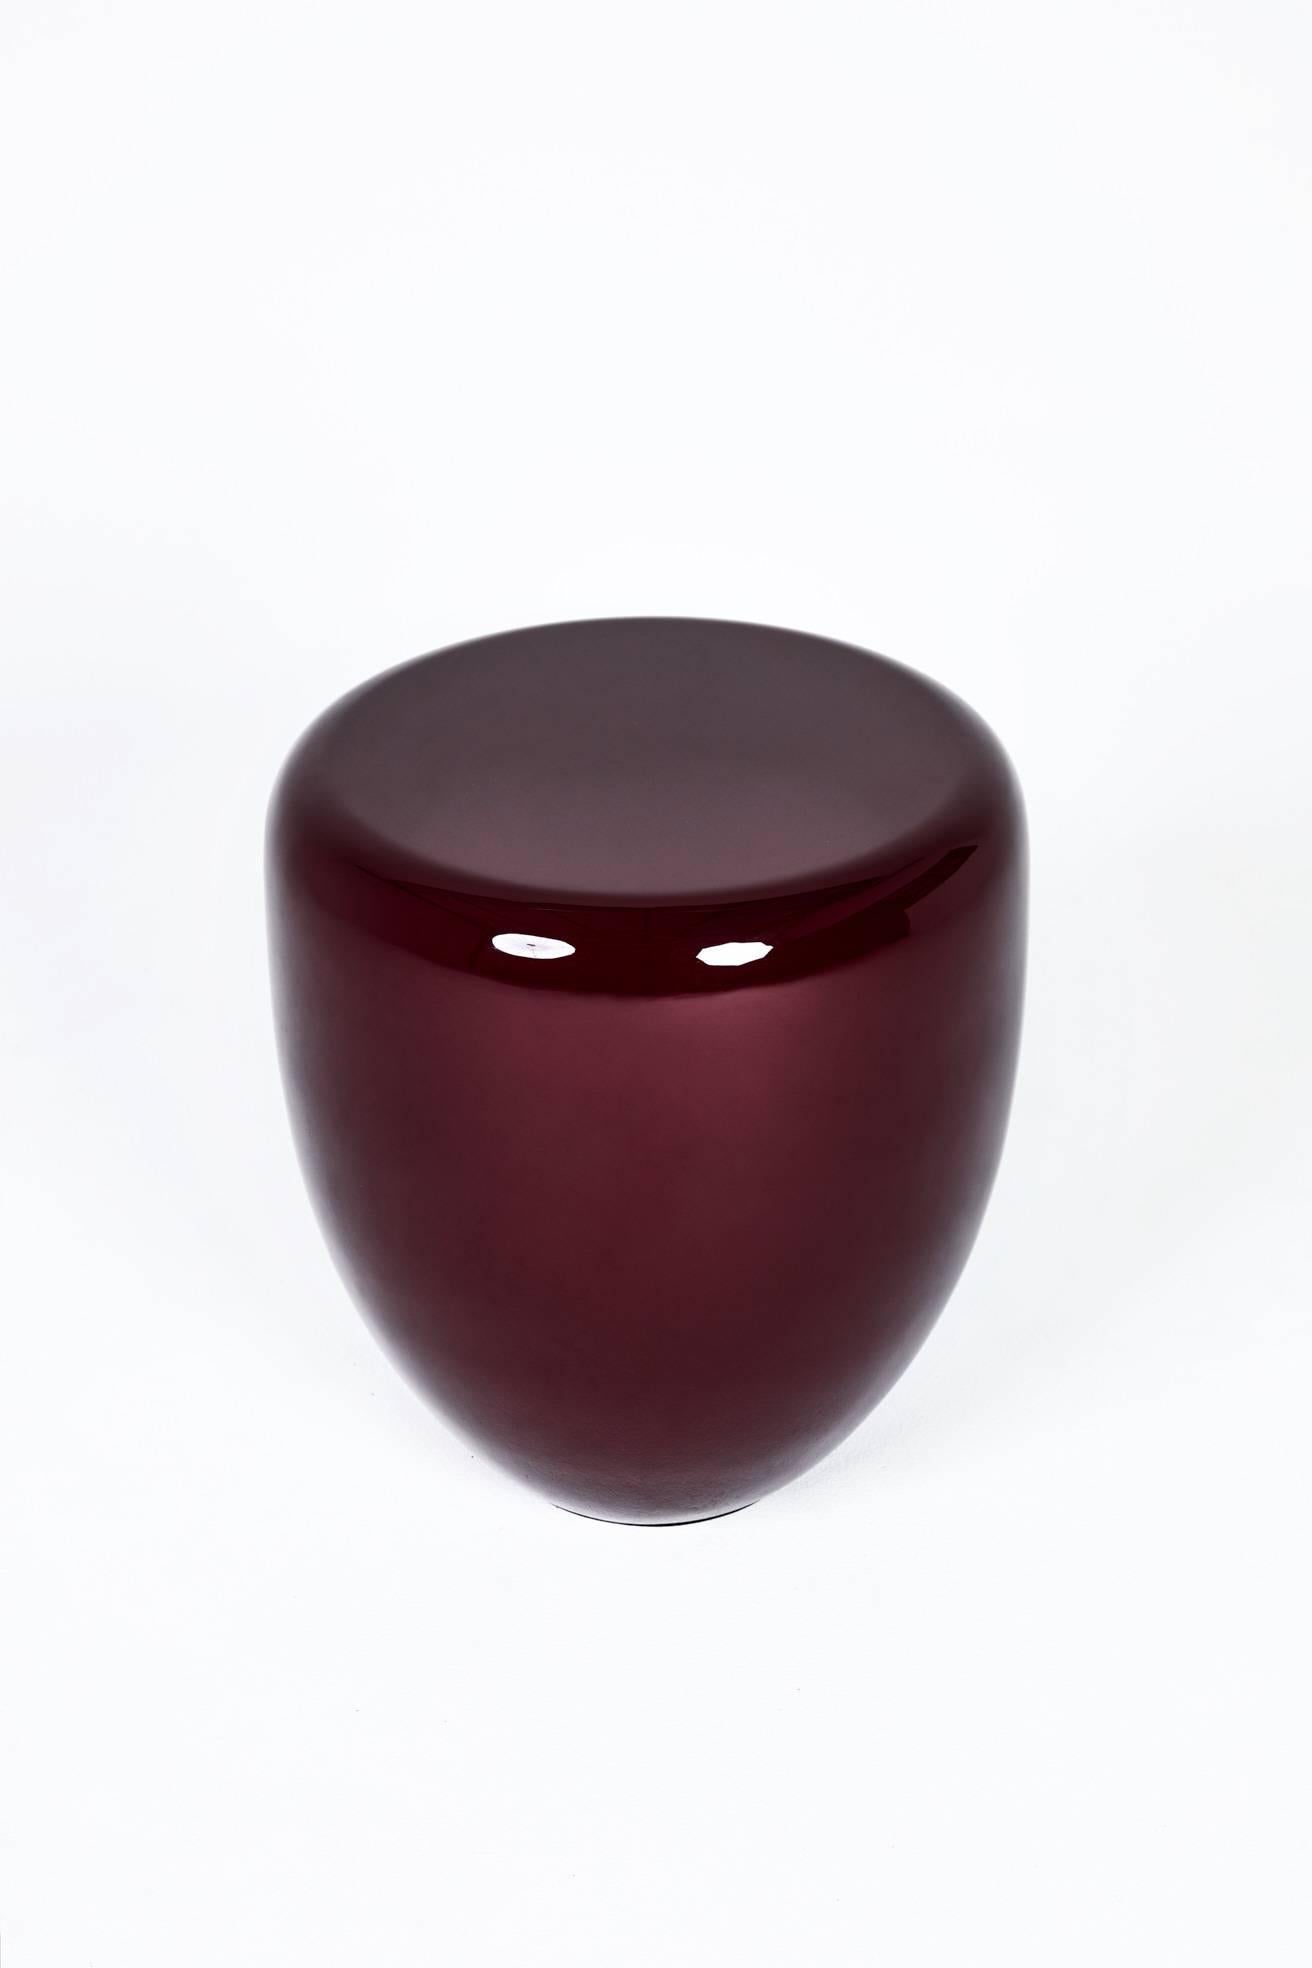 Minimalist Side Table, Deep Garnet DOT by Reda Amalou Design, 2017 - Glossy or mate lacquer For Sale